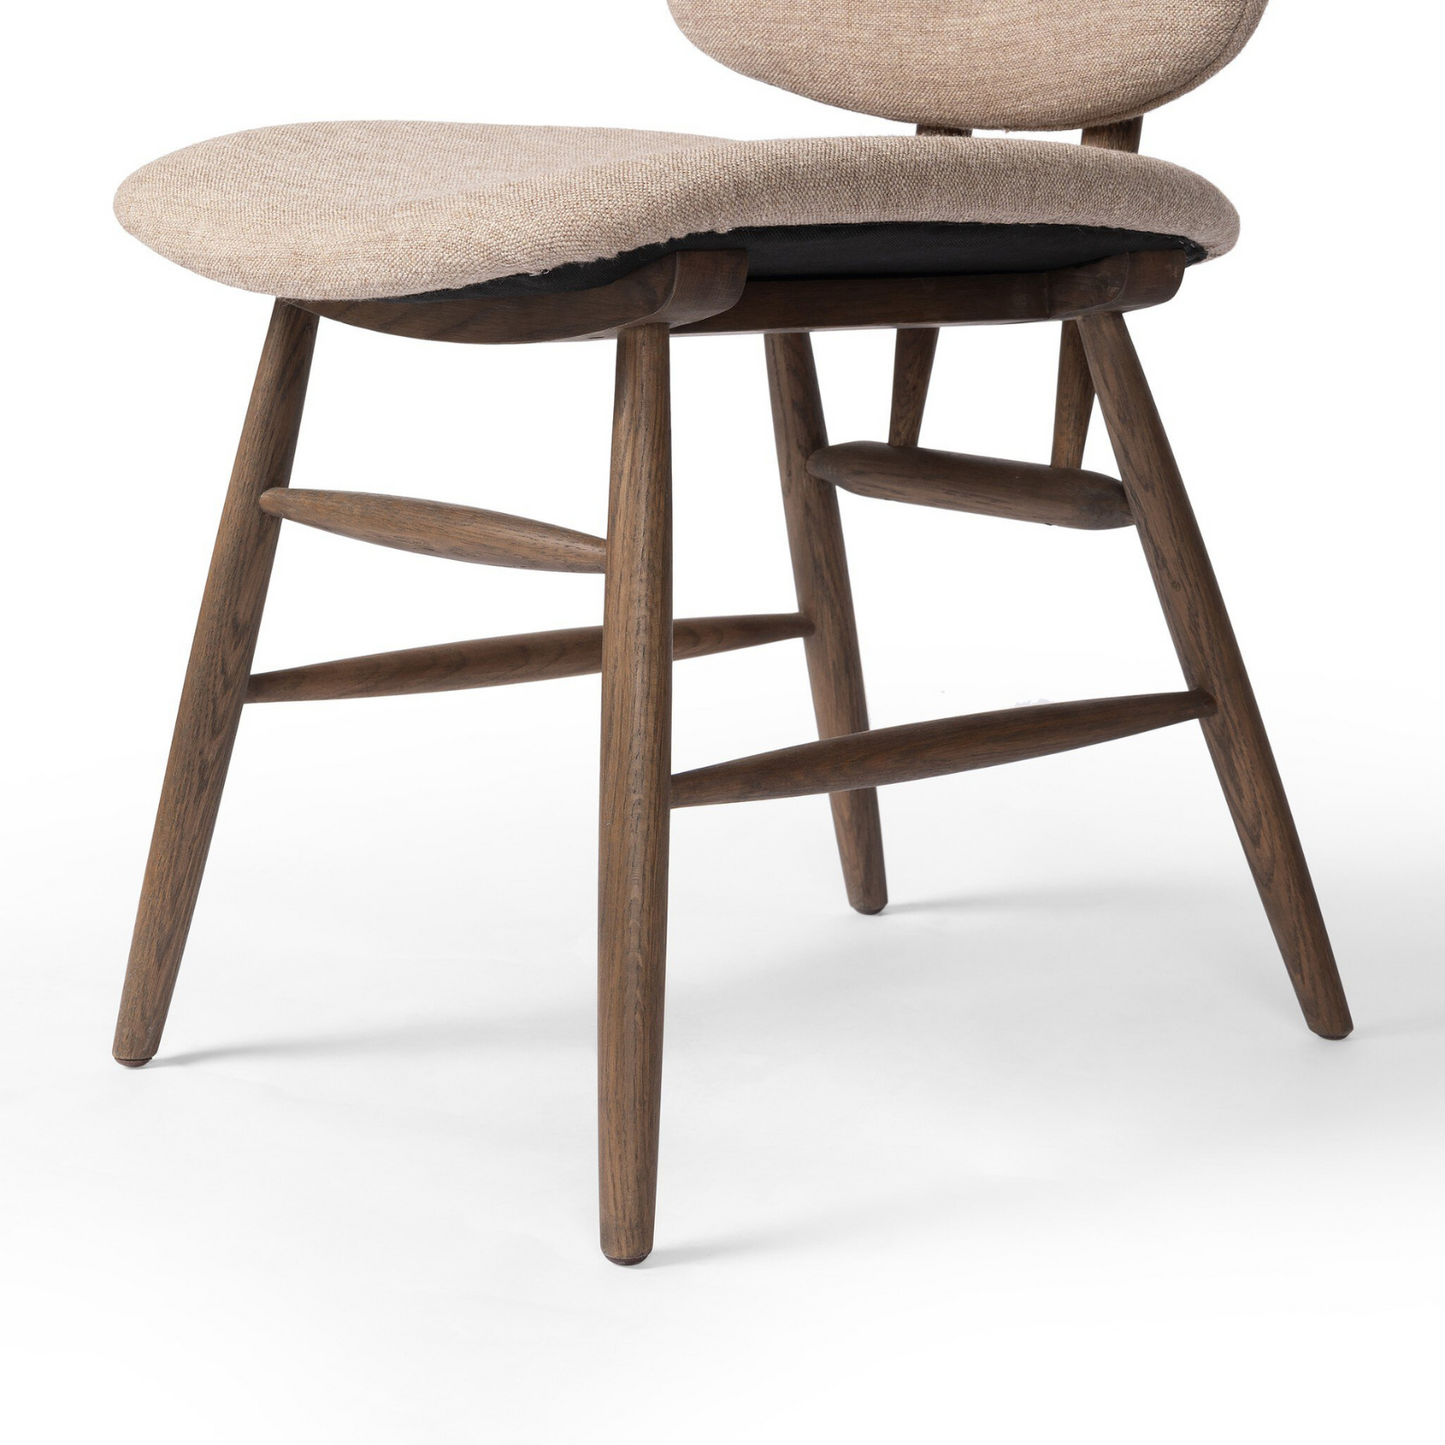 Milina Dining Chair